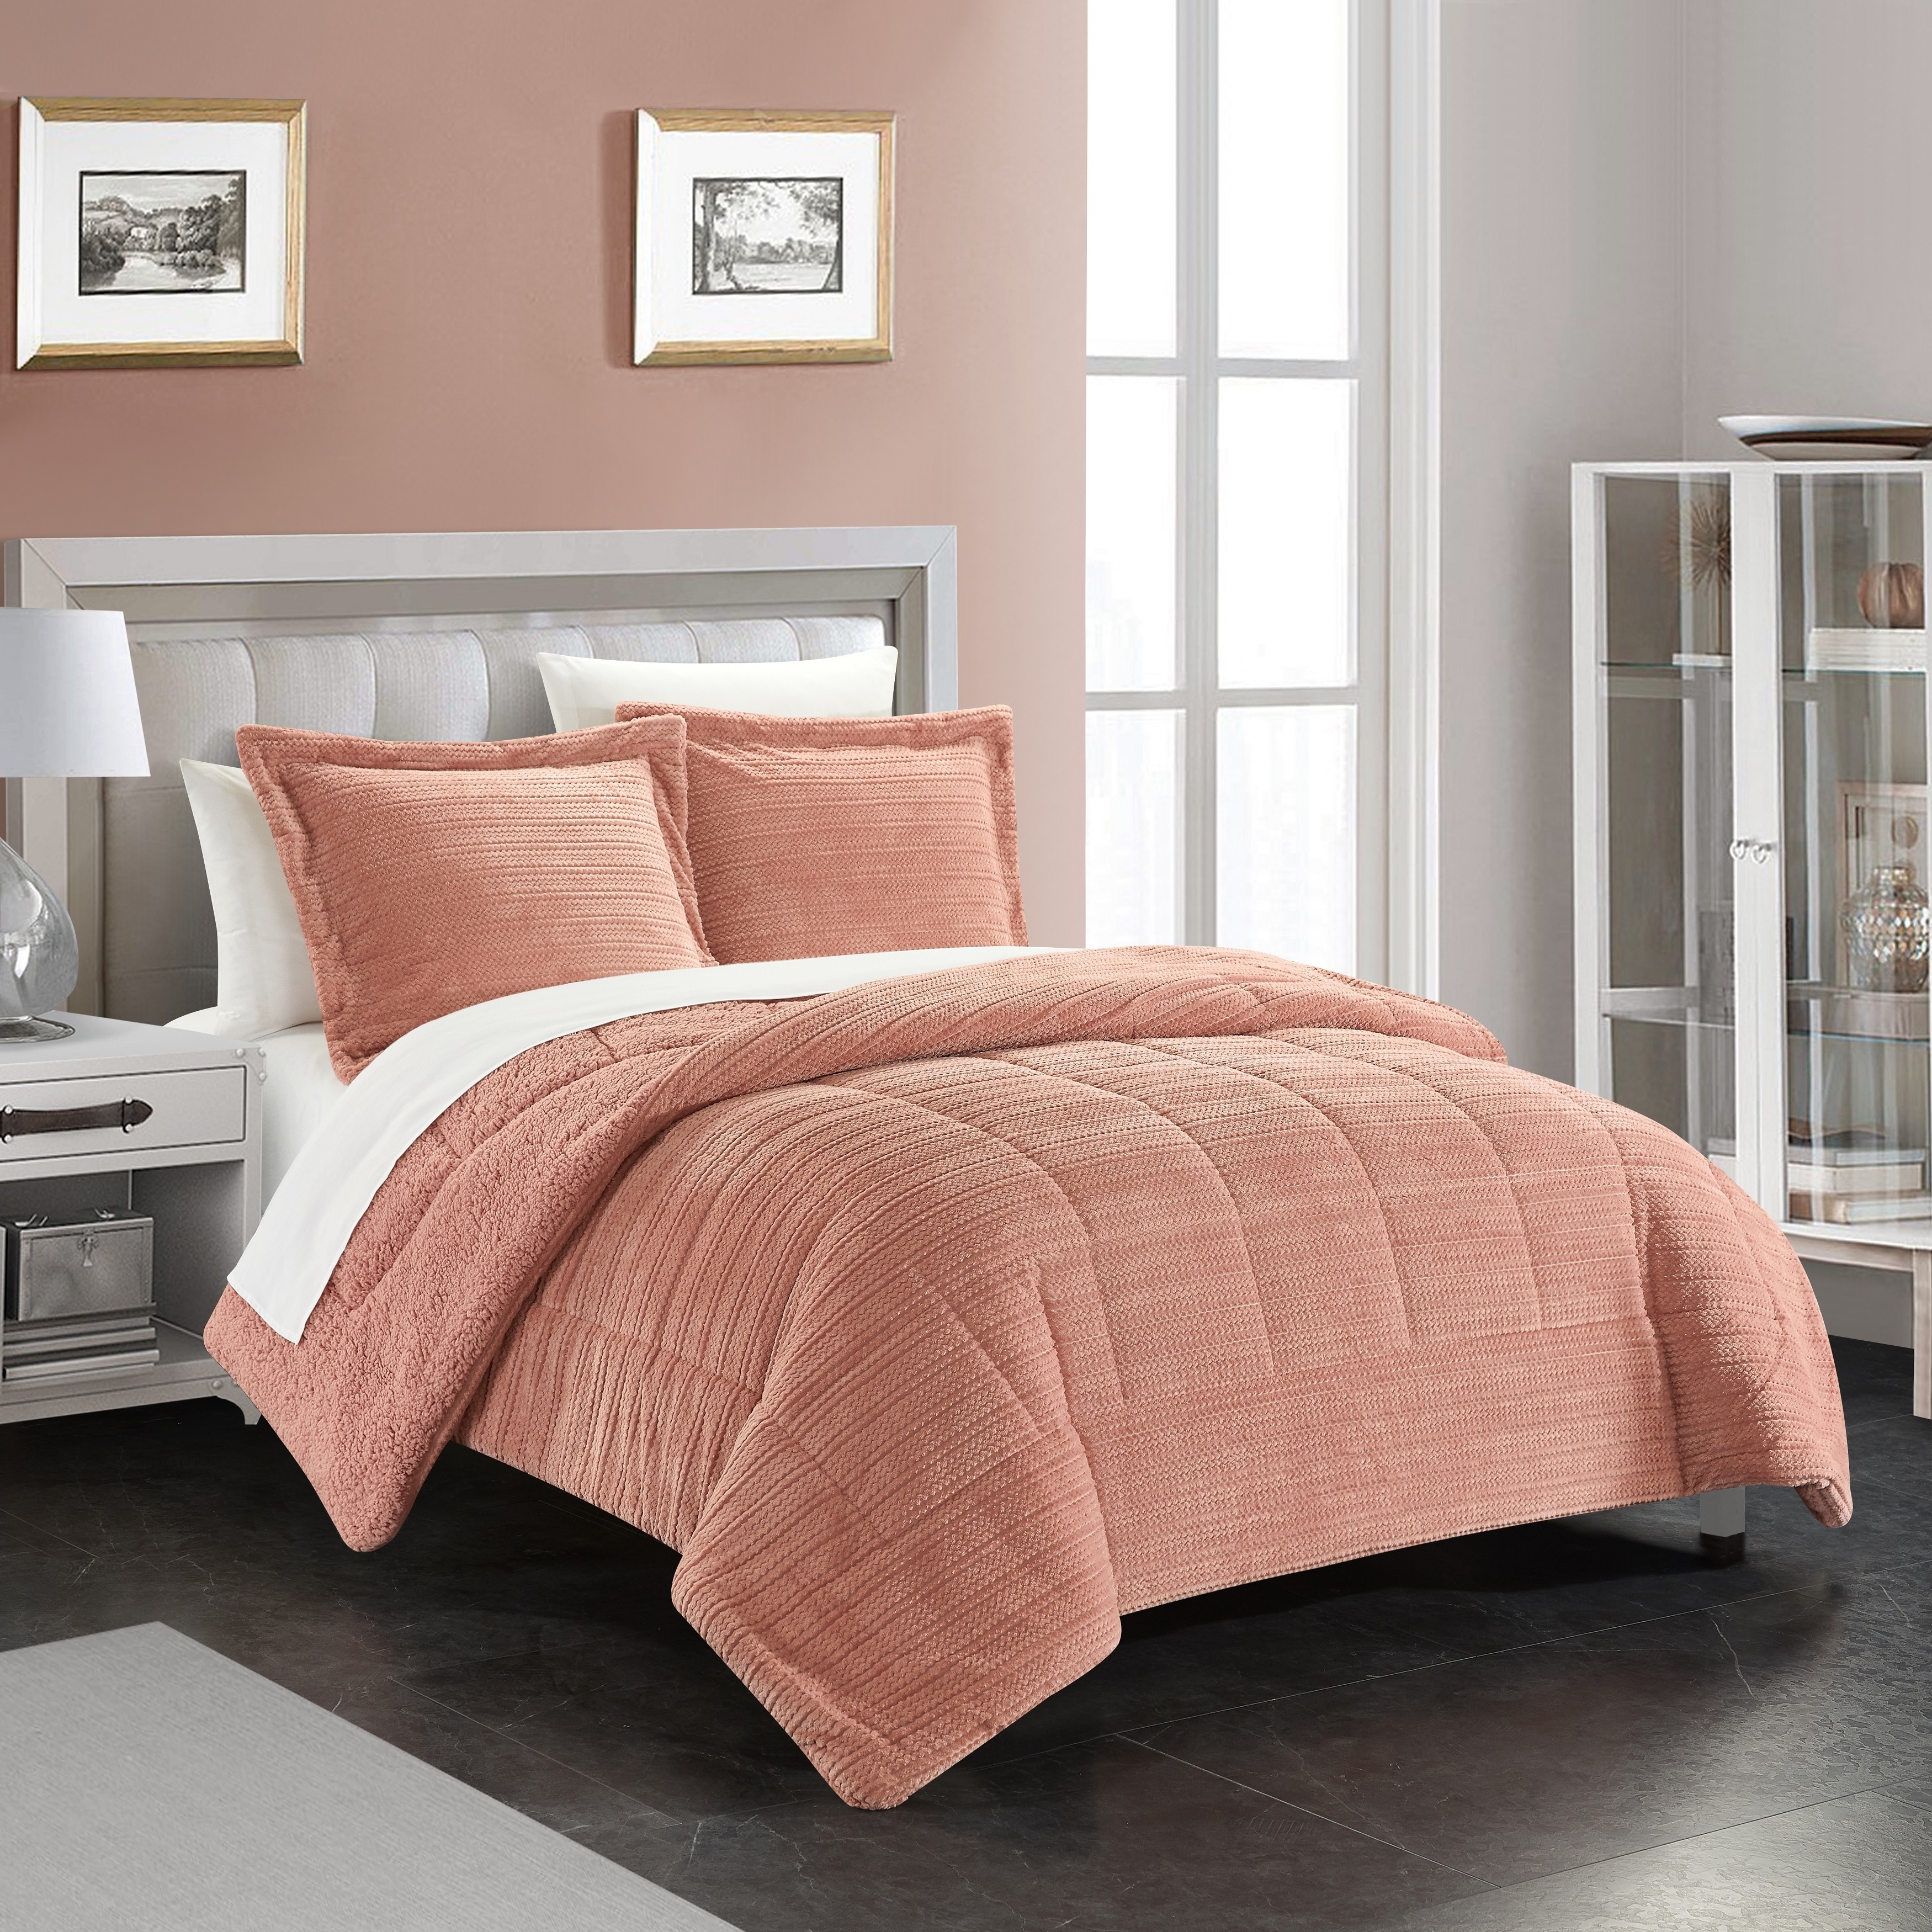 Ryland 3 Or 2 Piece Comforter Set Ribbed Textured Microplush Sherpa Bedding - Pillow Shams Included - Blush, Queen